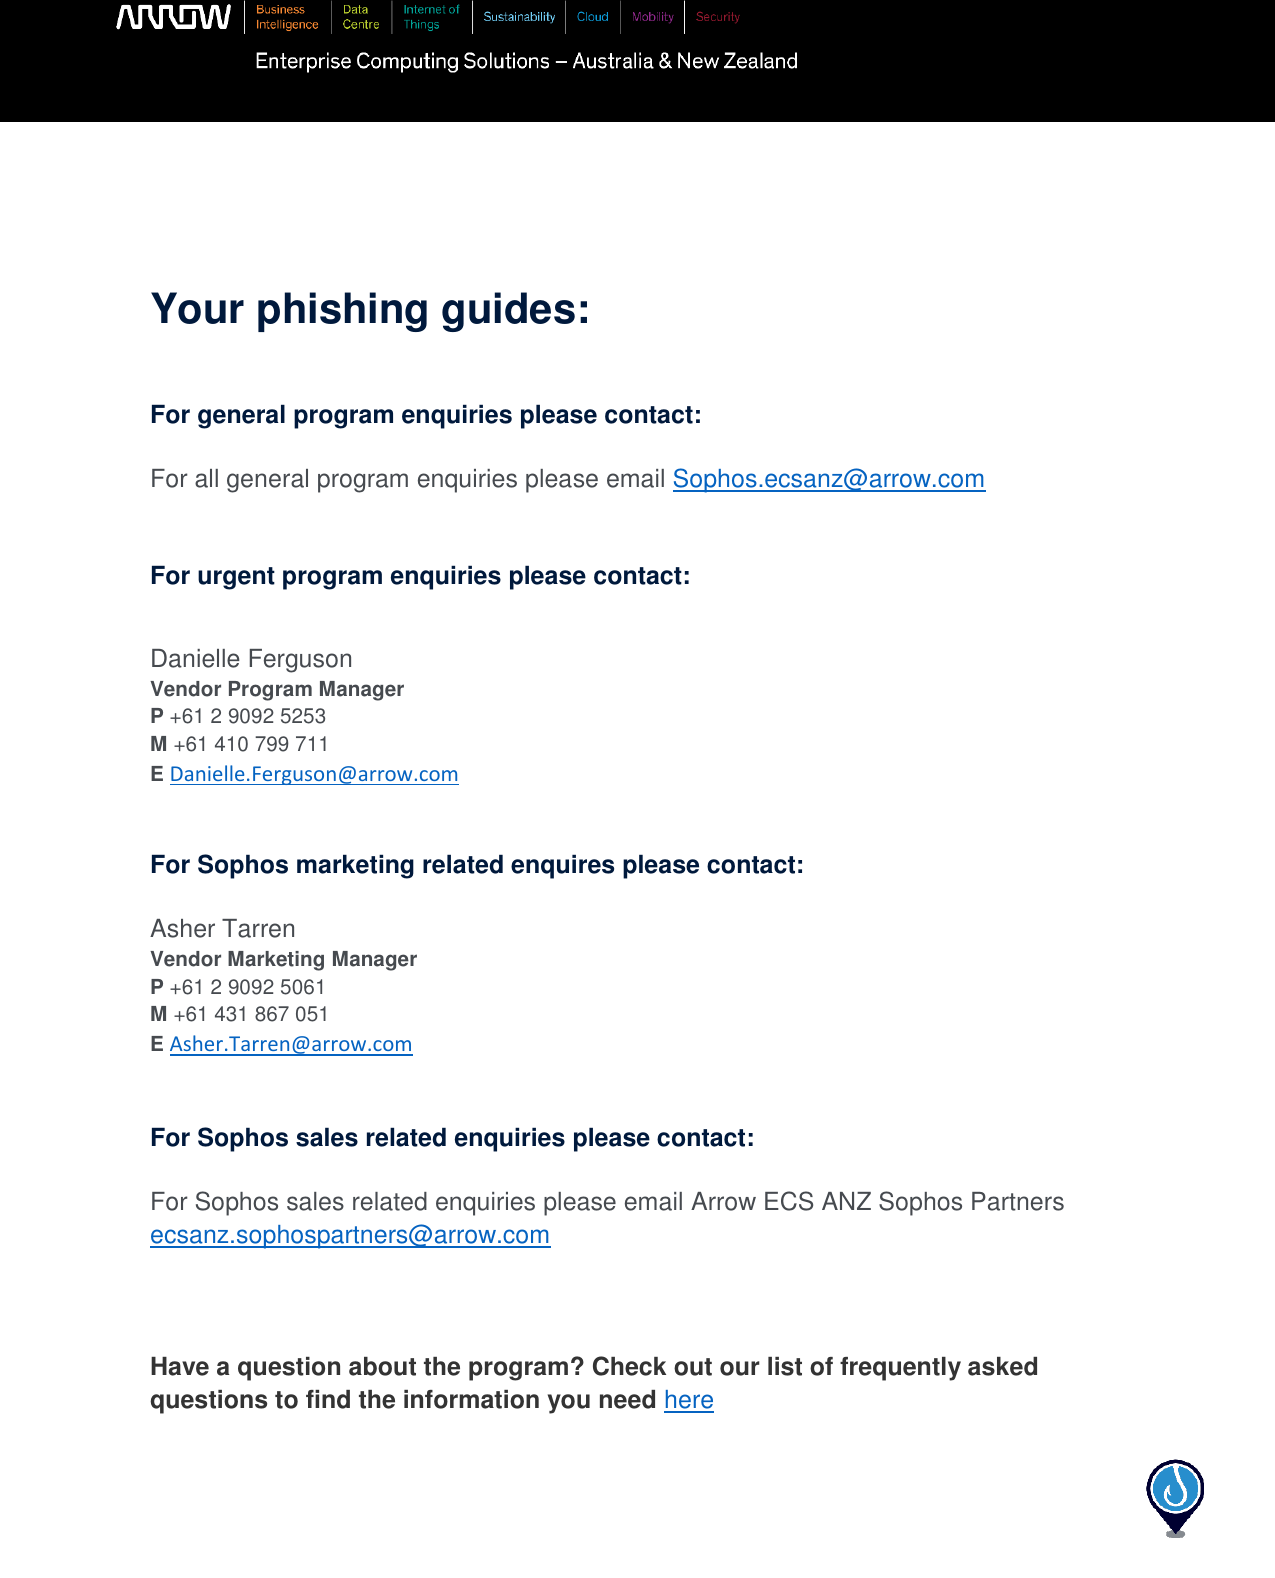 Page 5 of 6 - Sophos-Phishing-Expedition Program-Overview